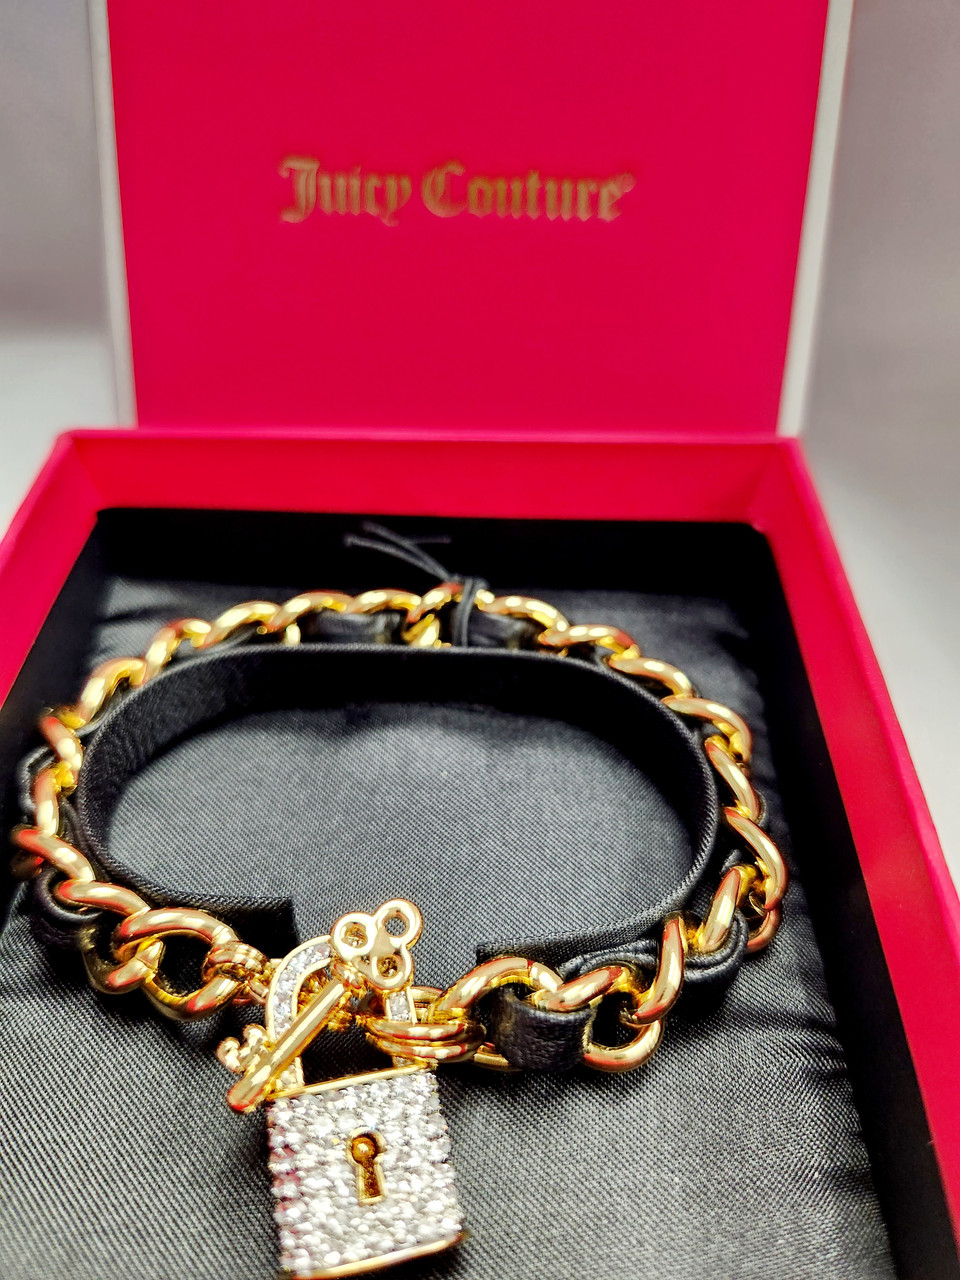 Juicy Couture, Jewelry, Juicy Couture Bracelet Kit New